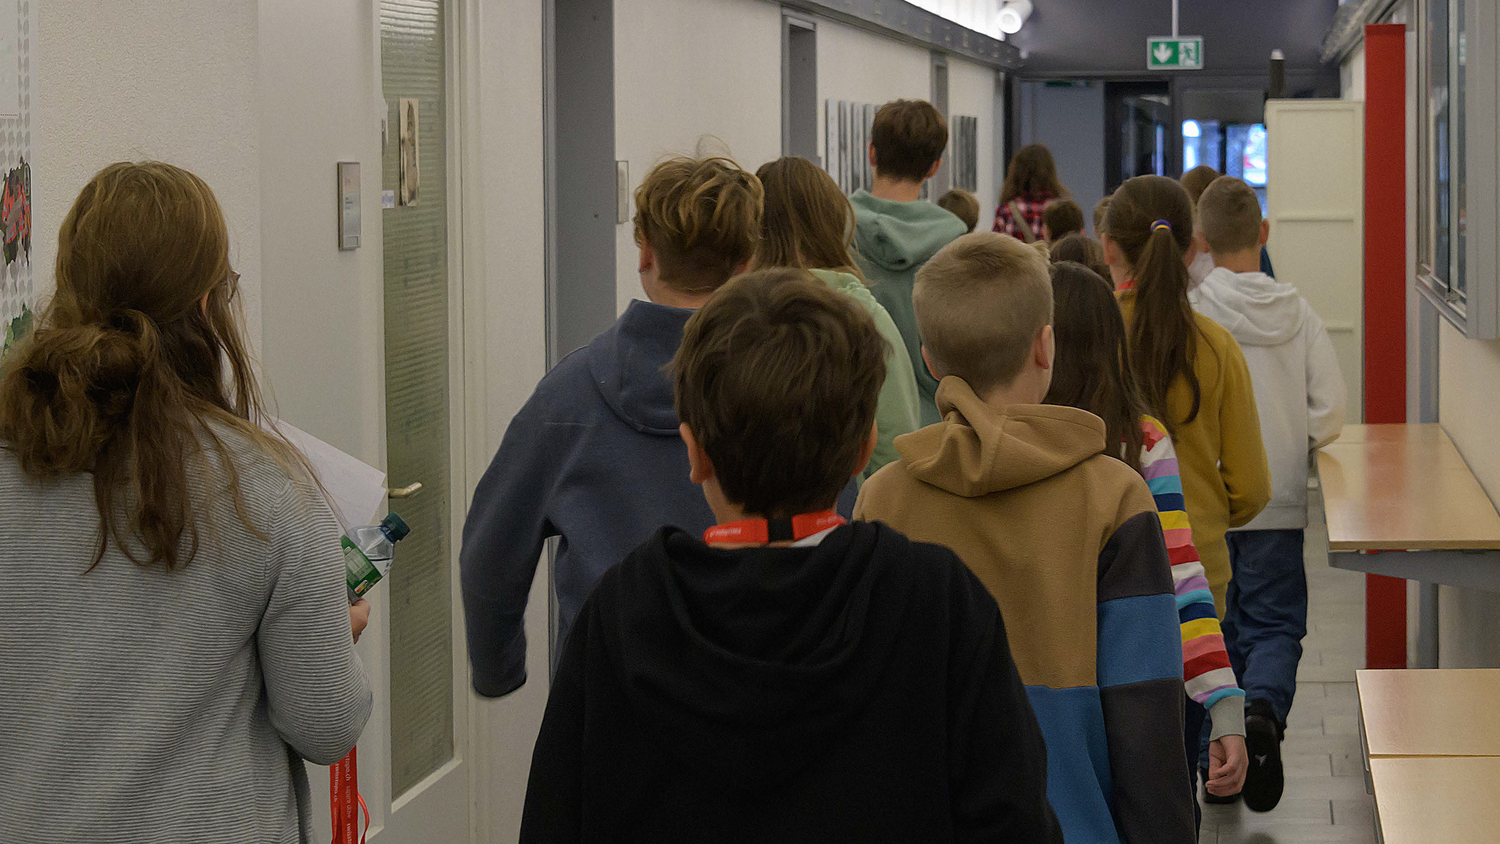 A group of visitors in the corridor of the swisstopo building